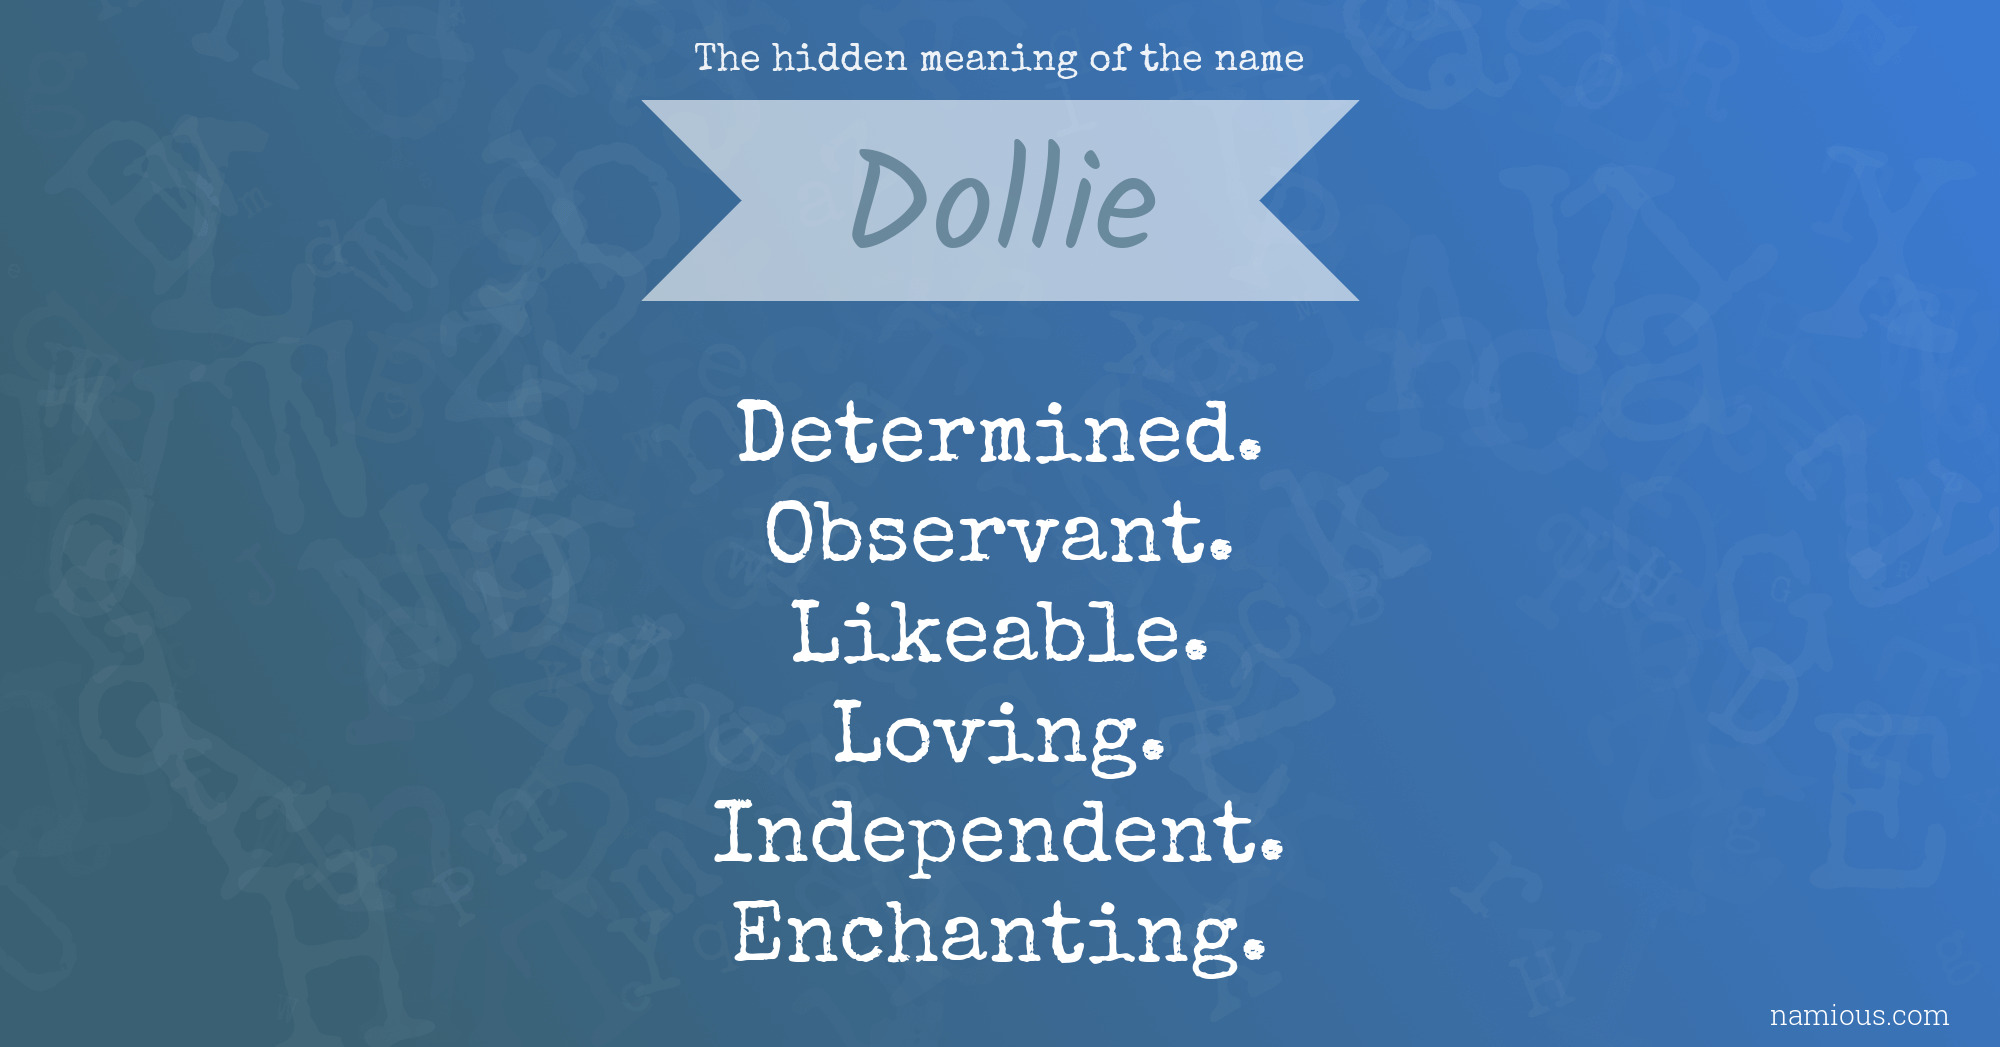 The hidden meaning of the name Dollie